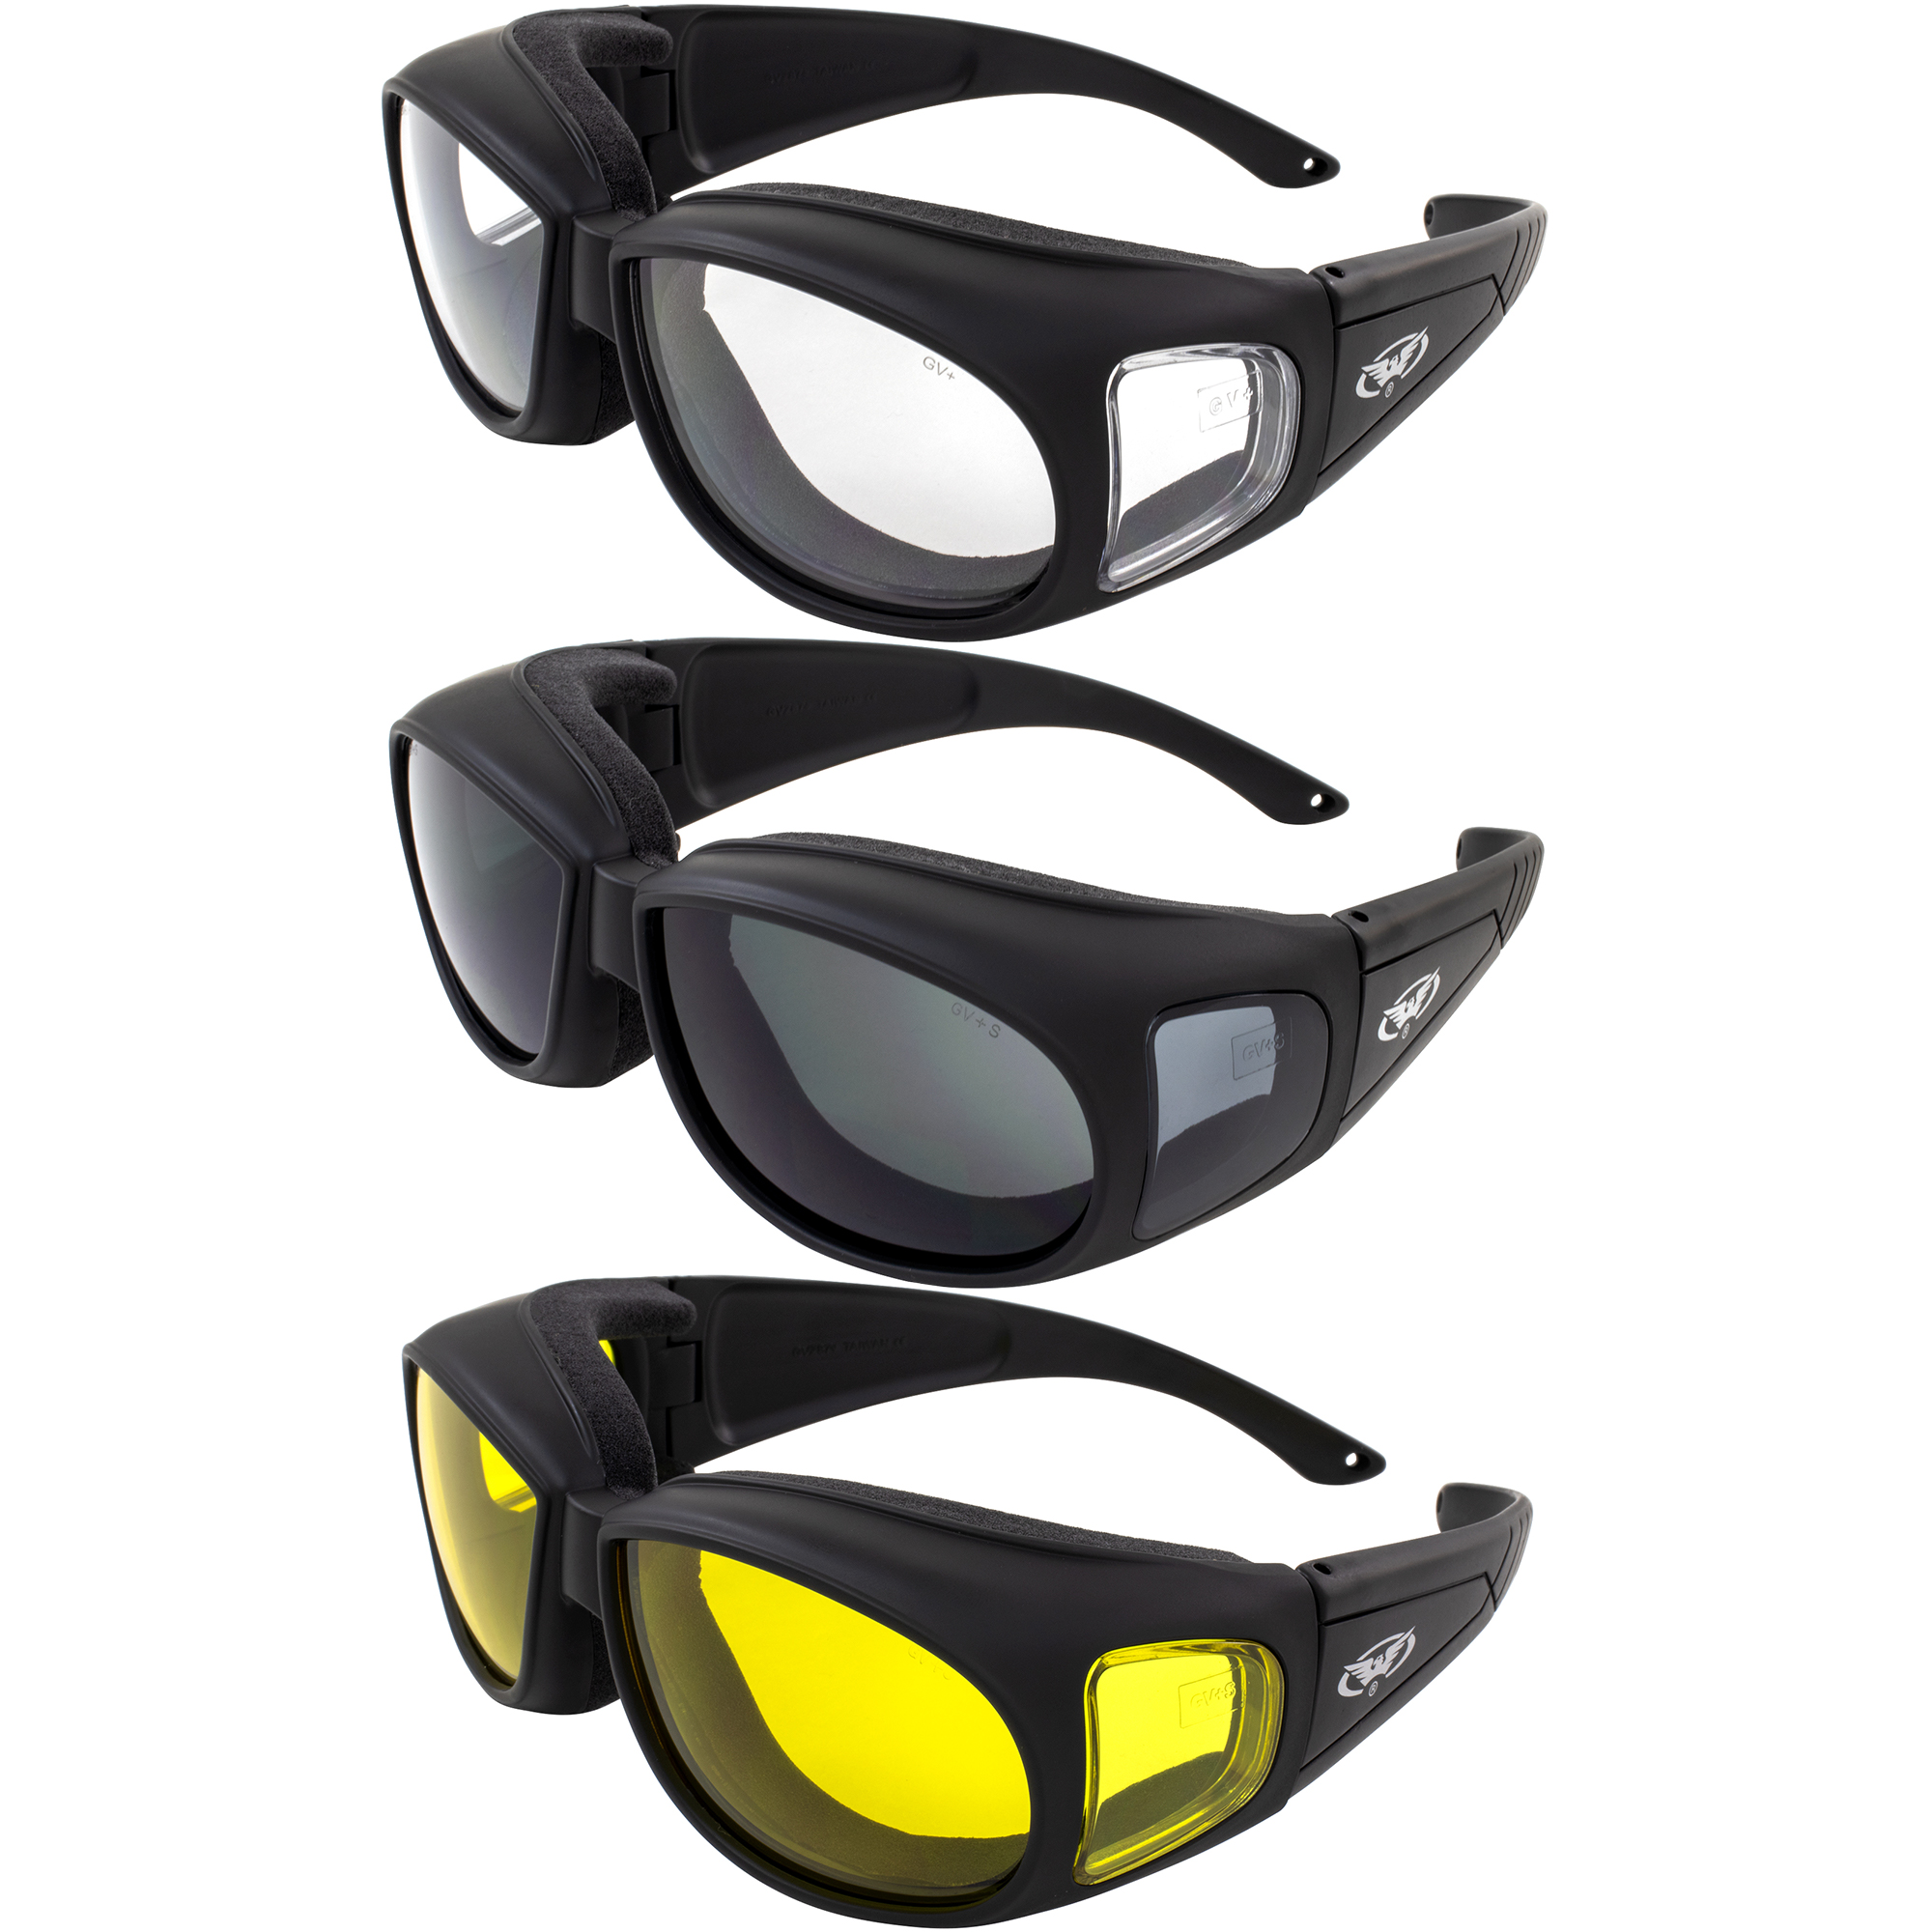 Three (3) Pairs Motorcycle Safety Sunglasses Fits Over Rx Glasses Smoke, Clear, and Yellow Day & Night & Gun Range! Usage Meets ANSI Z87.1 Standards - image 1 of 7